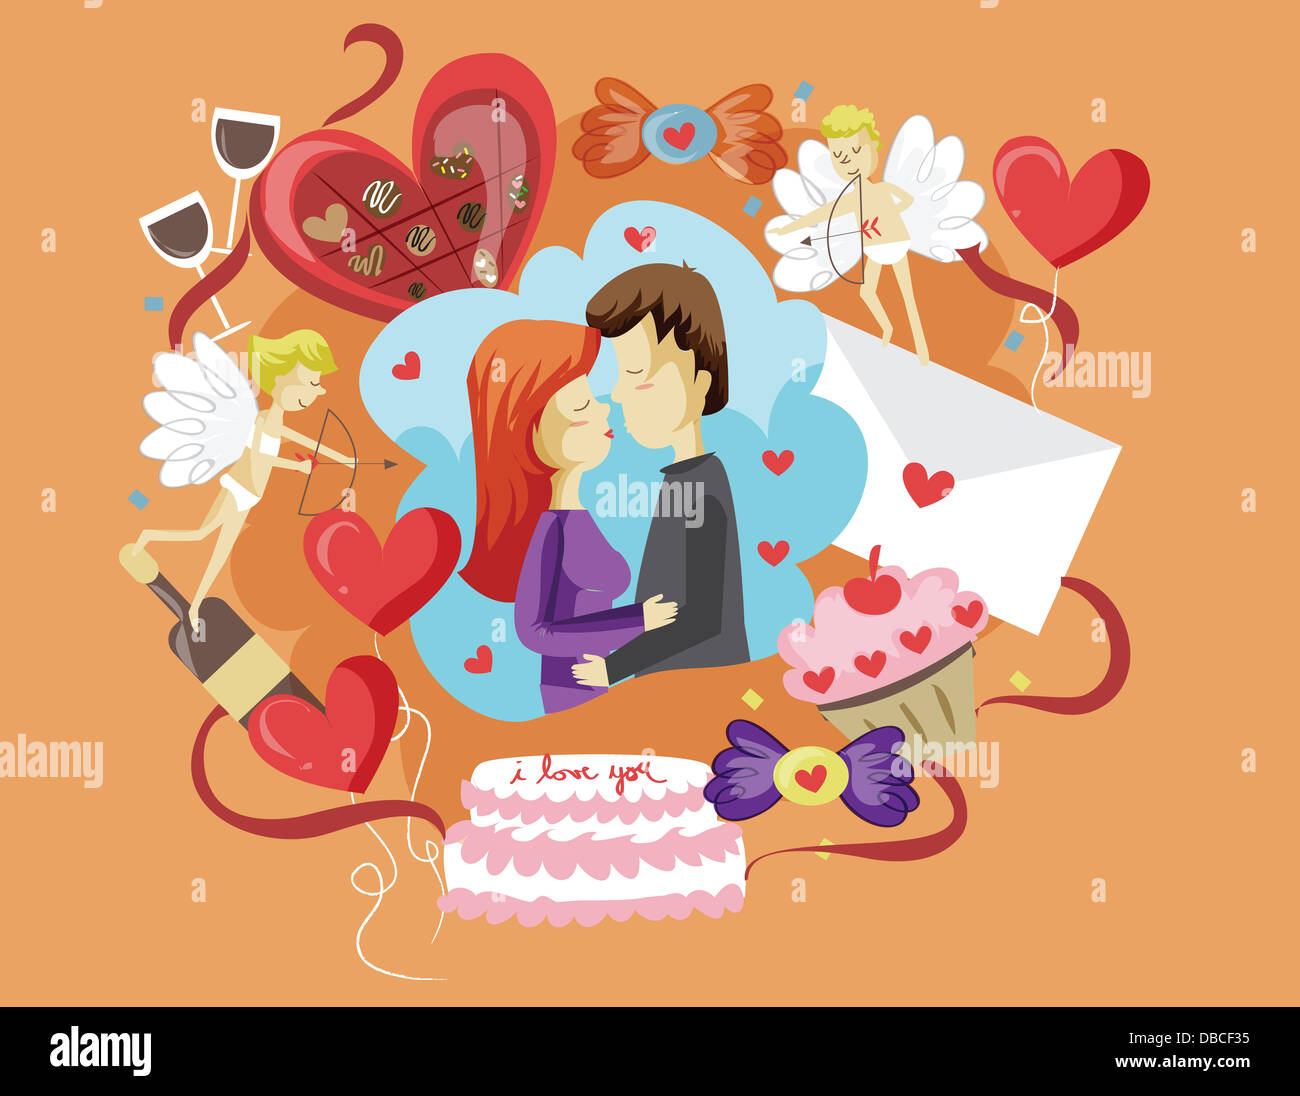 Illustration of couple kissing representing Valentine's day Stock Photo